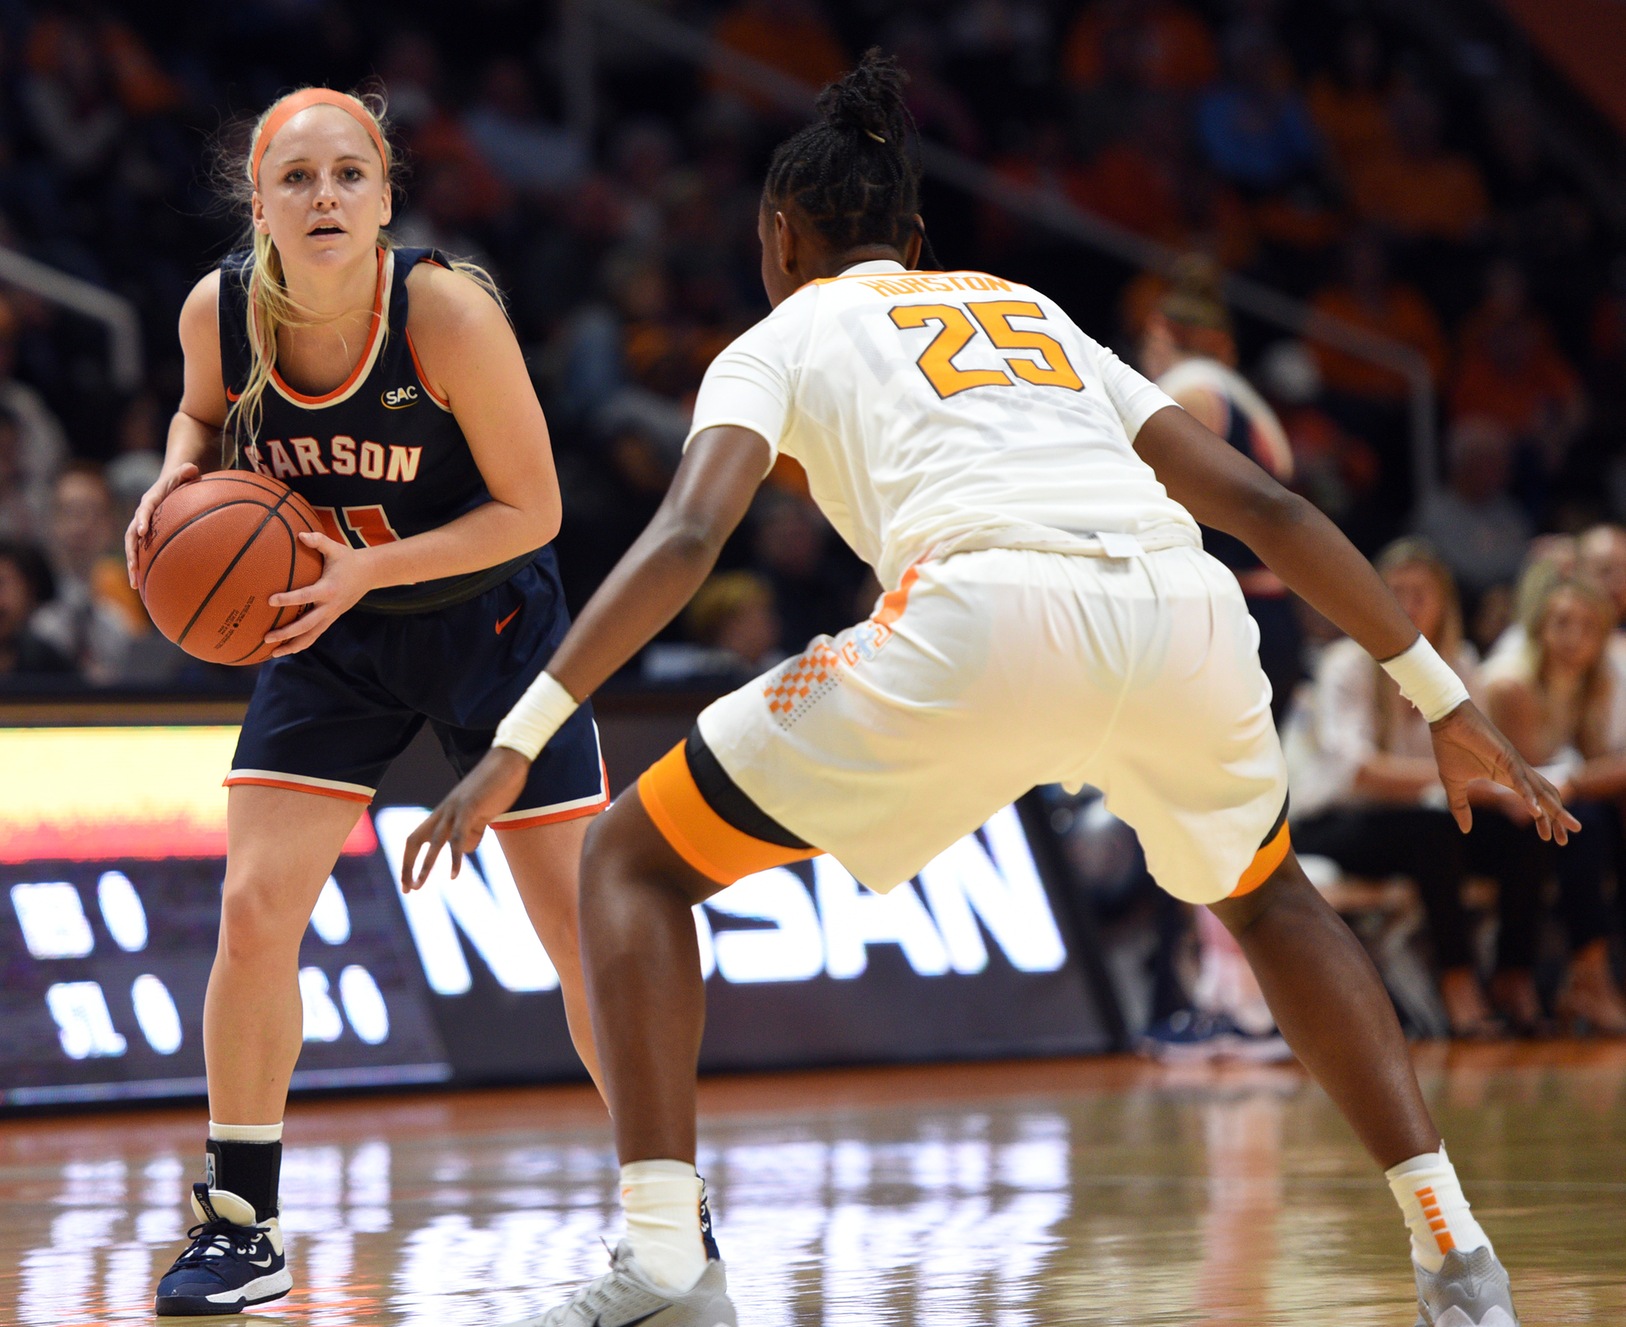 Lady Eagles hang tough with Lady Vols on Rocky Top